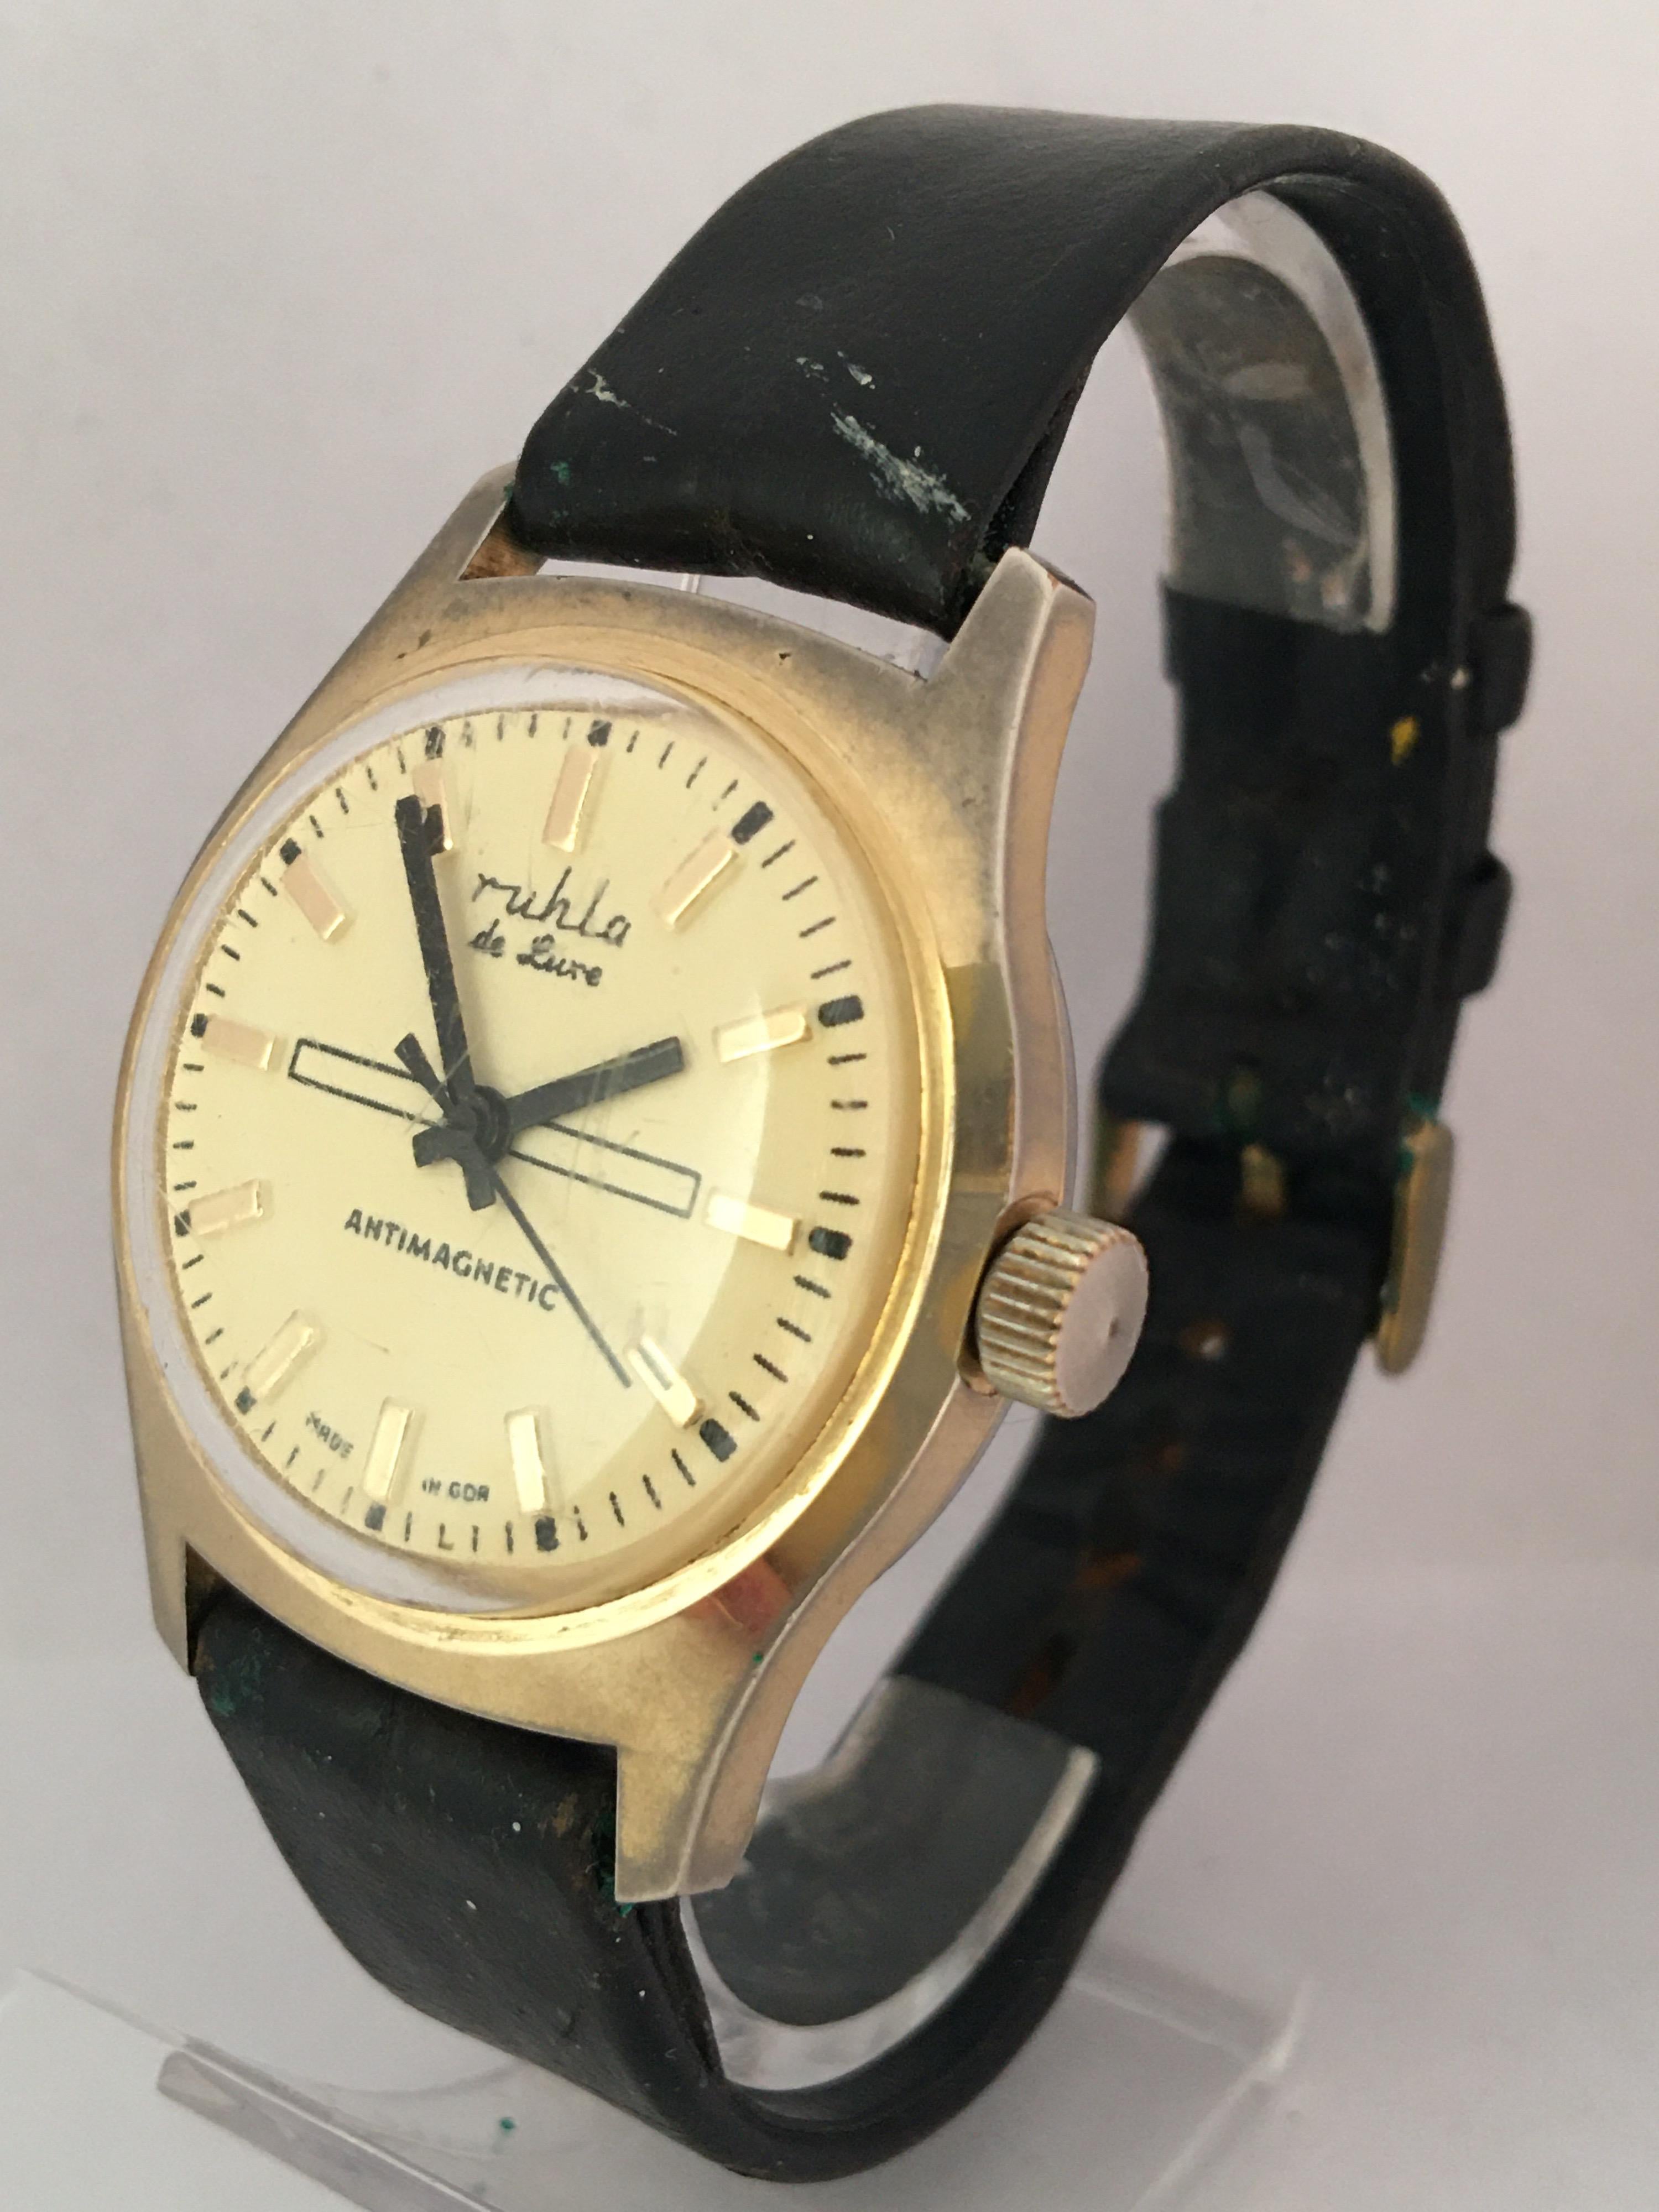 This beautiful pre-owned vintage hand winding watch is in good working condition and it is running well. Visible signs of ageing and wear with light scratches on the glass and on the watch case as shown. The gold plated watch case is tarnished as